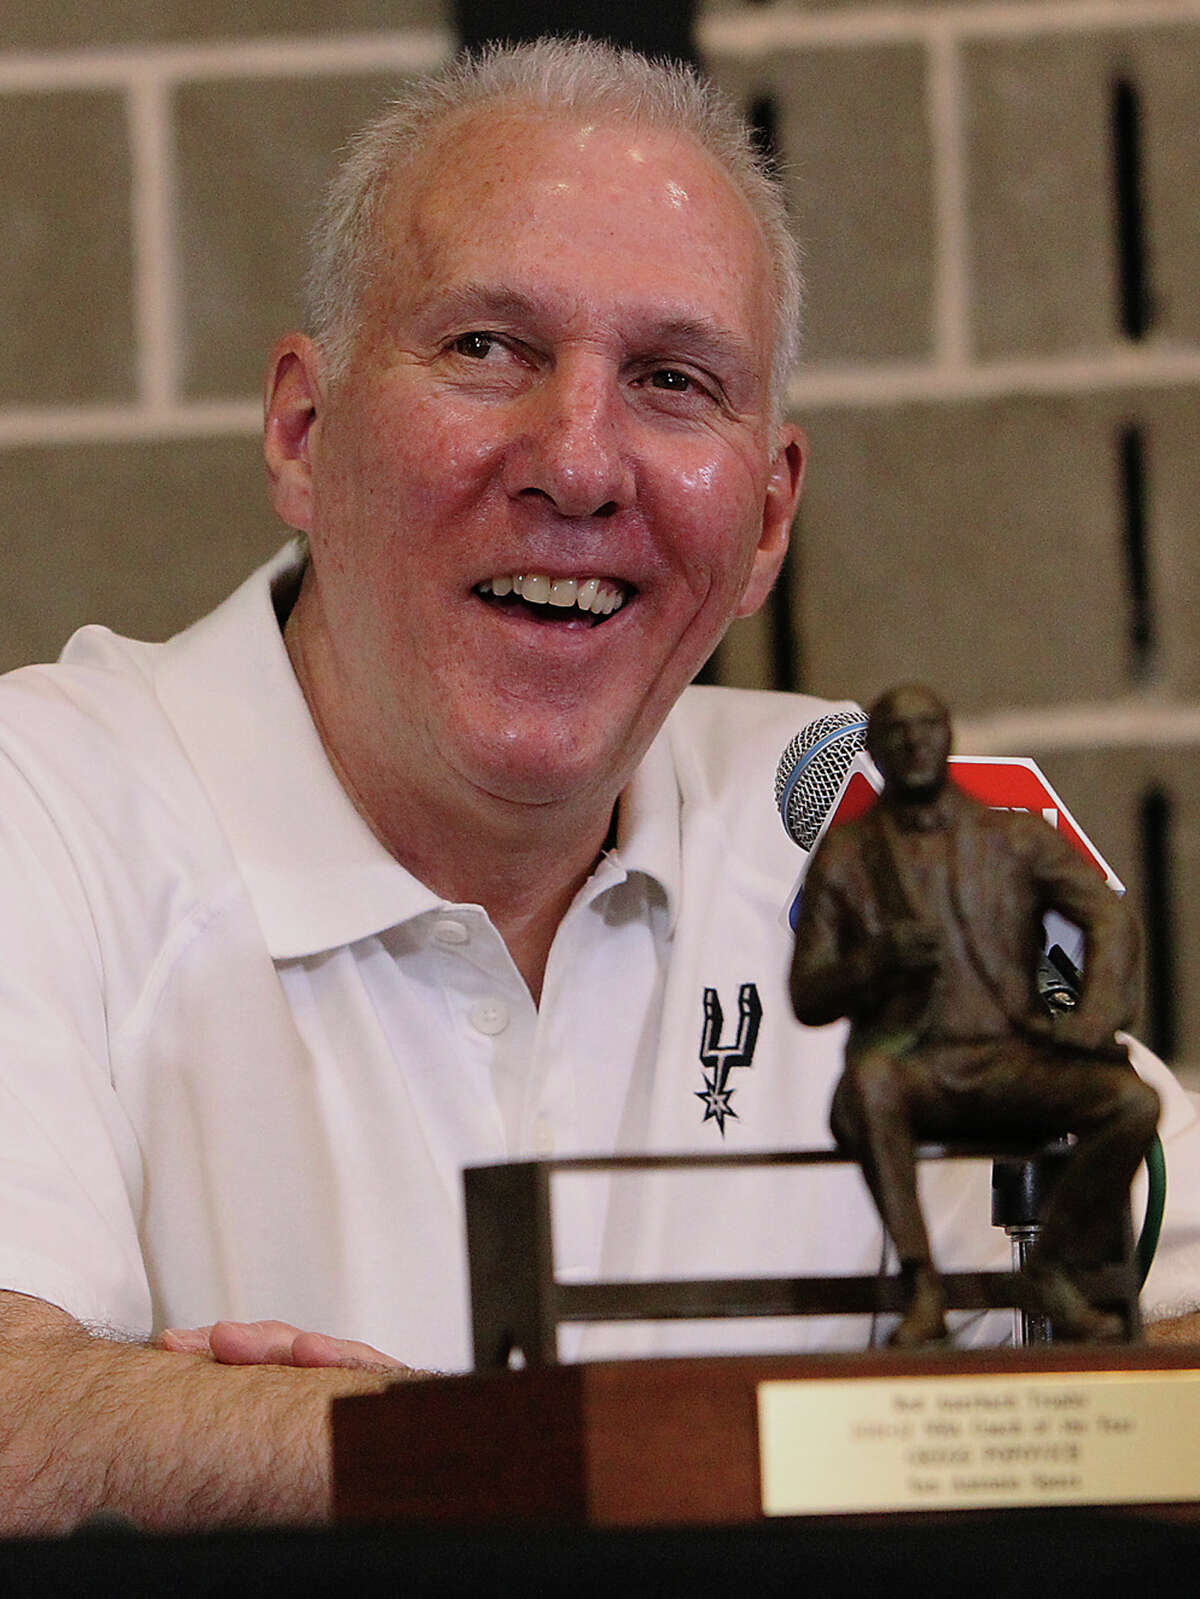 Spurs head coach Gregg Popovich with his Red Auerbach coach of the year trophy in 2012.